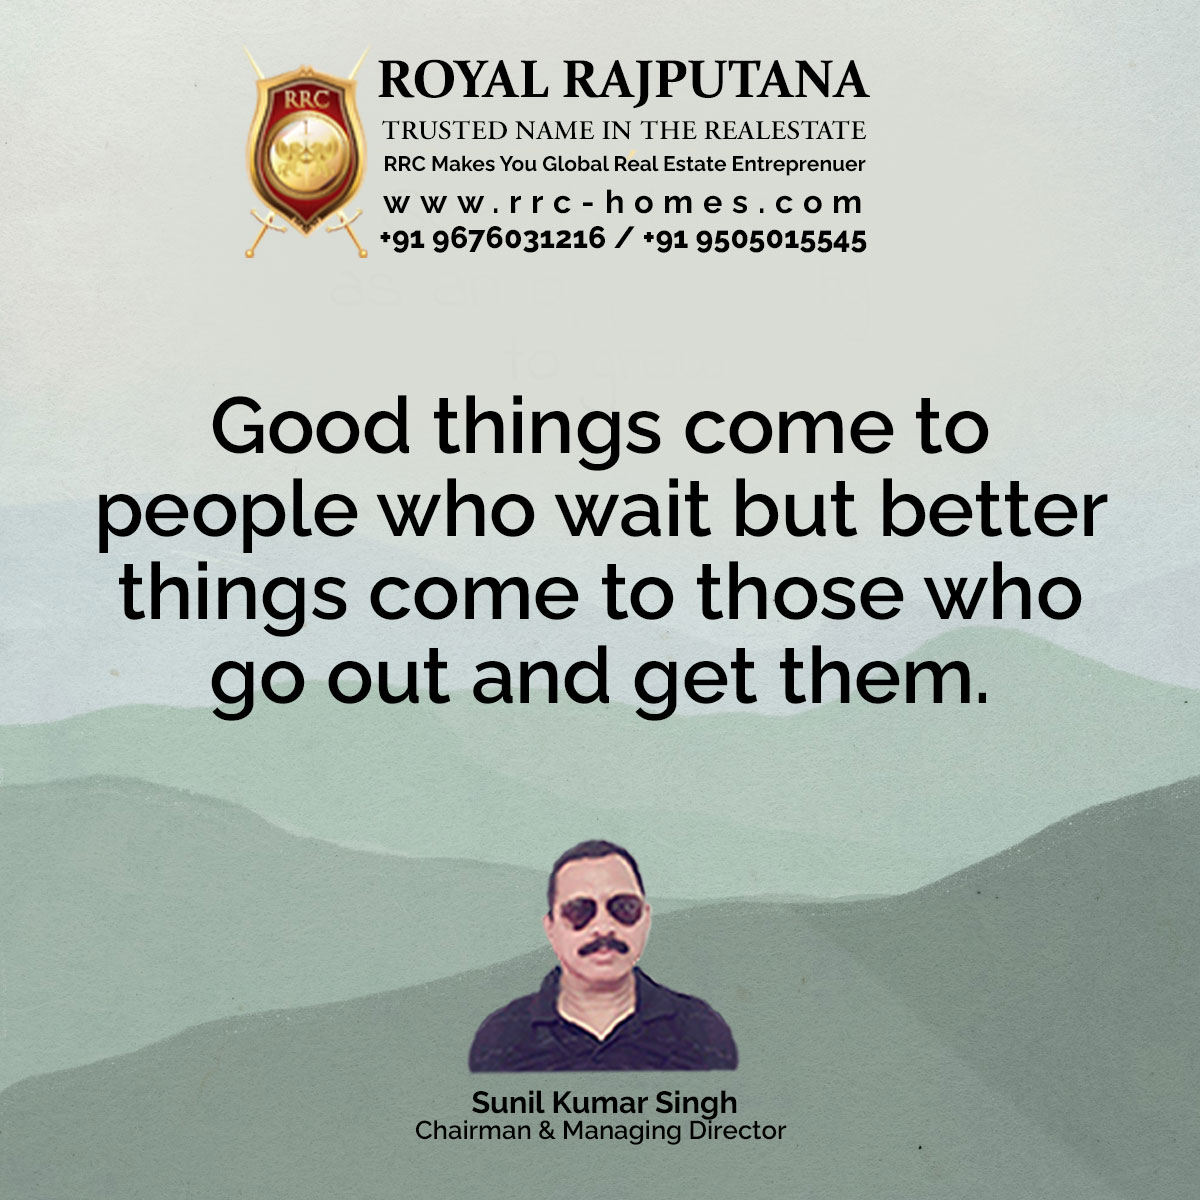 Good things come to people who wait but better things come to those who go out and get them.

#royalrajputana #royalrajputanahomes #rrc #rrchomes #sale  #interiordesign #buildingprojects #plotsales #hmdaprojects #infradevelopers #goodthings #wait #people #chance #life #goal